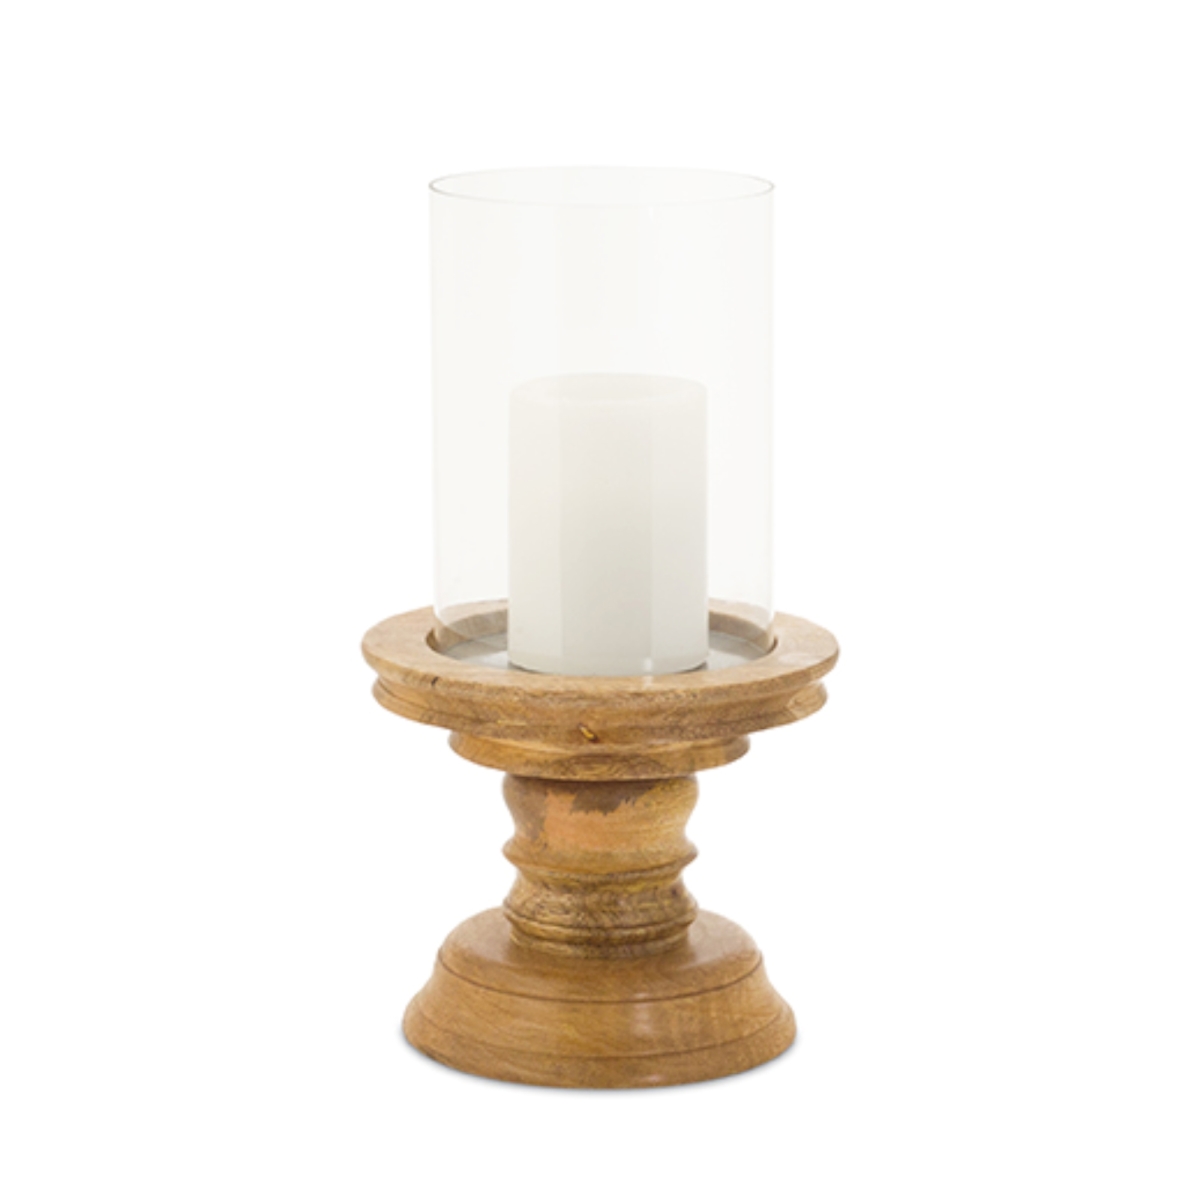 72106ds 12.75 X 7 In. Wood & Glass Candle Holder, Brown & Glass